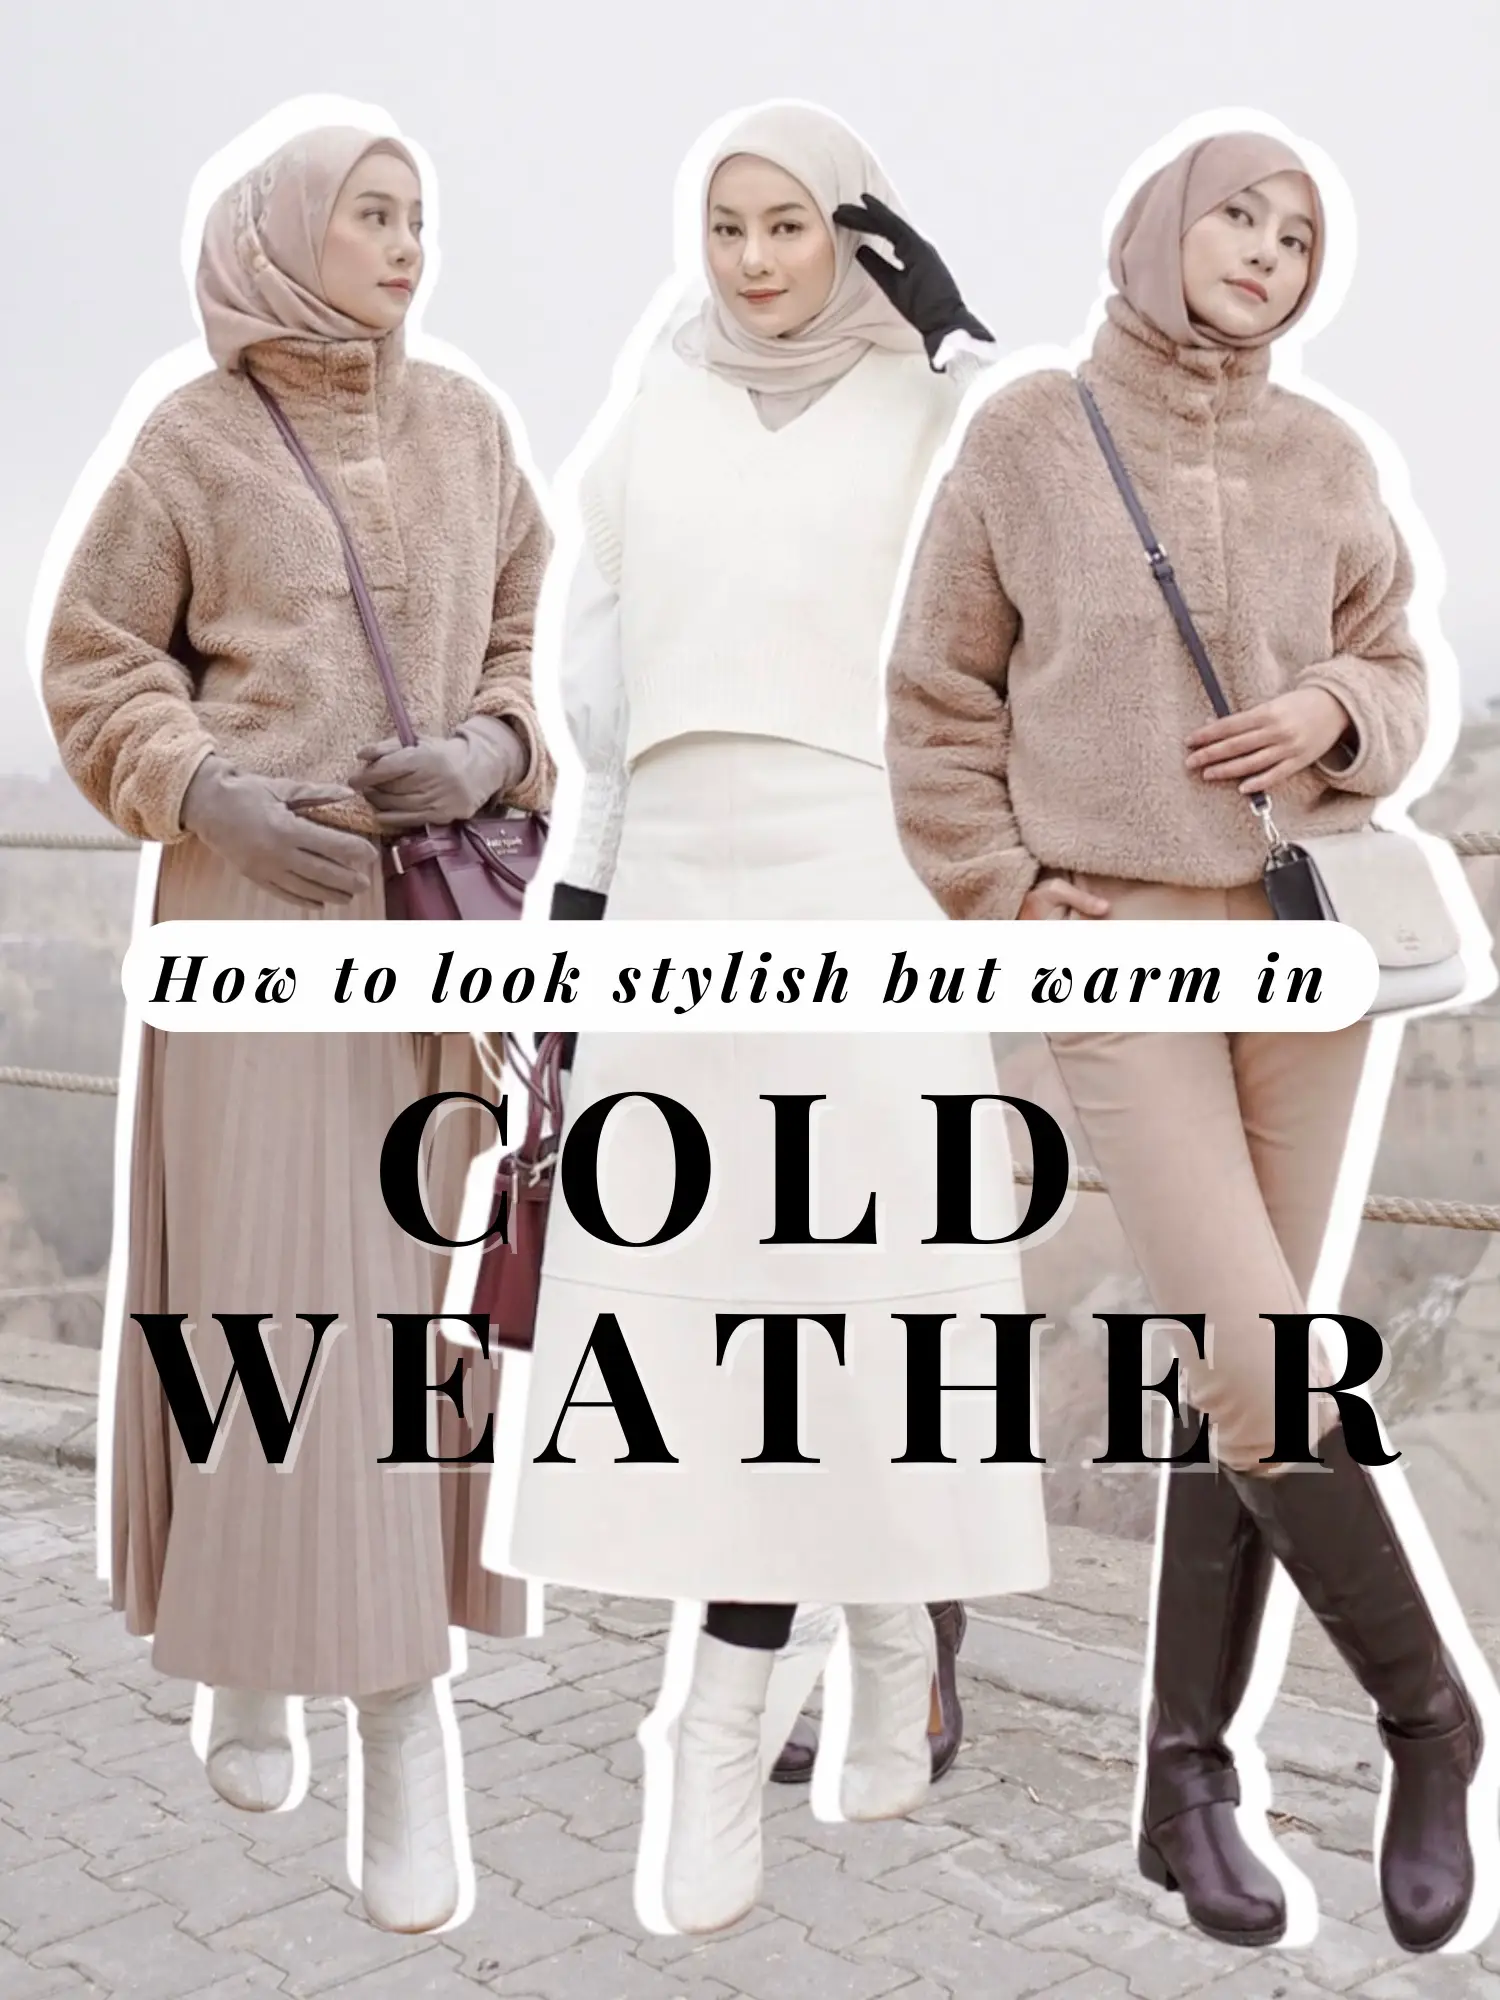 FEMININE OUTFITS FOR WINTER 